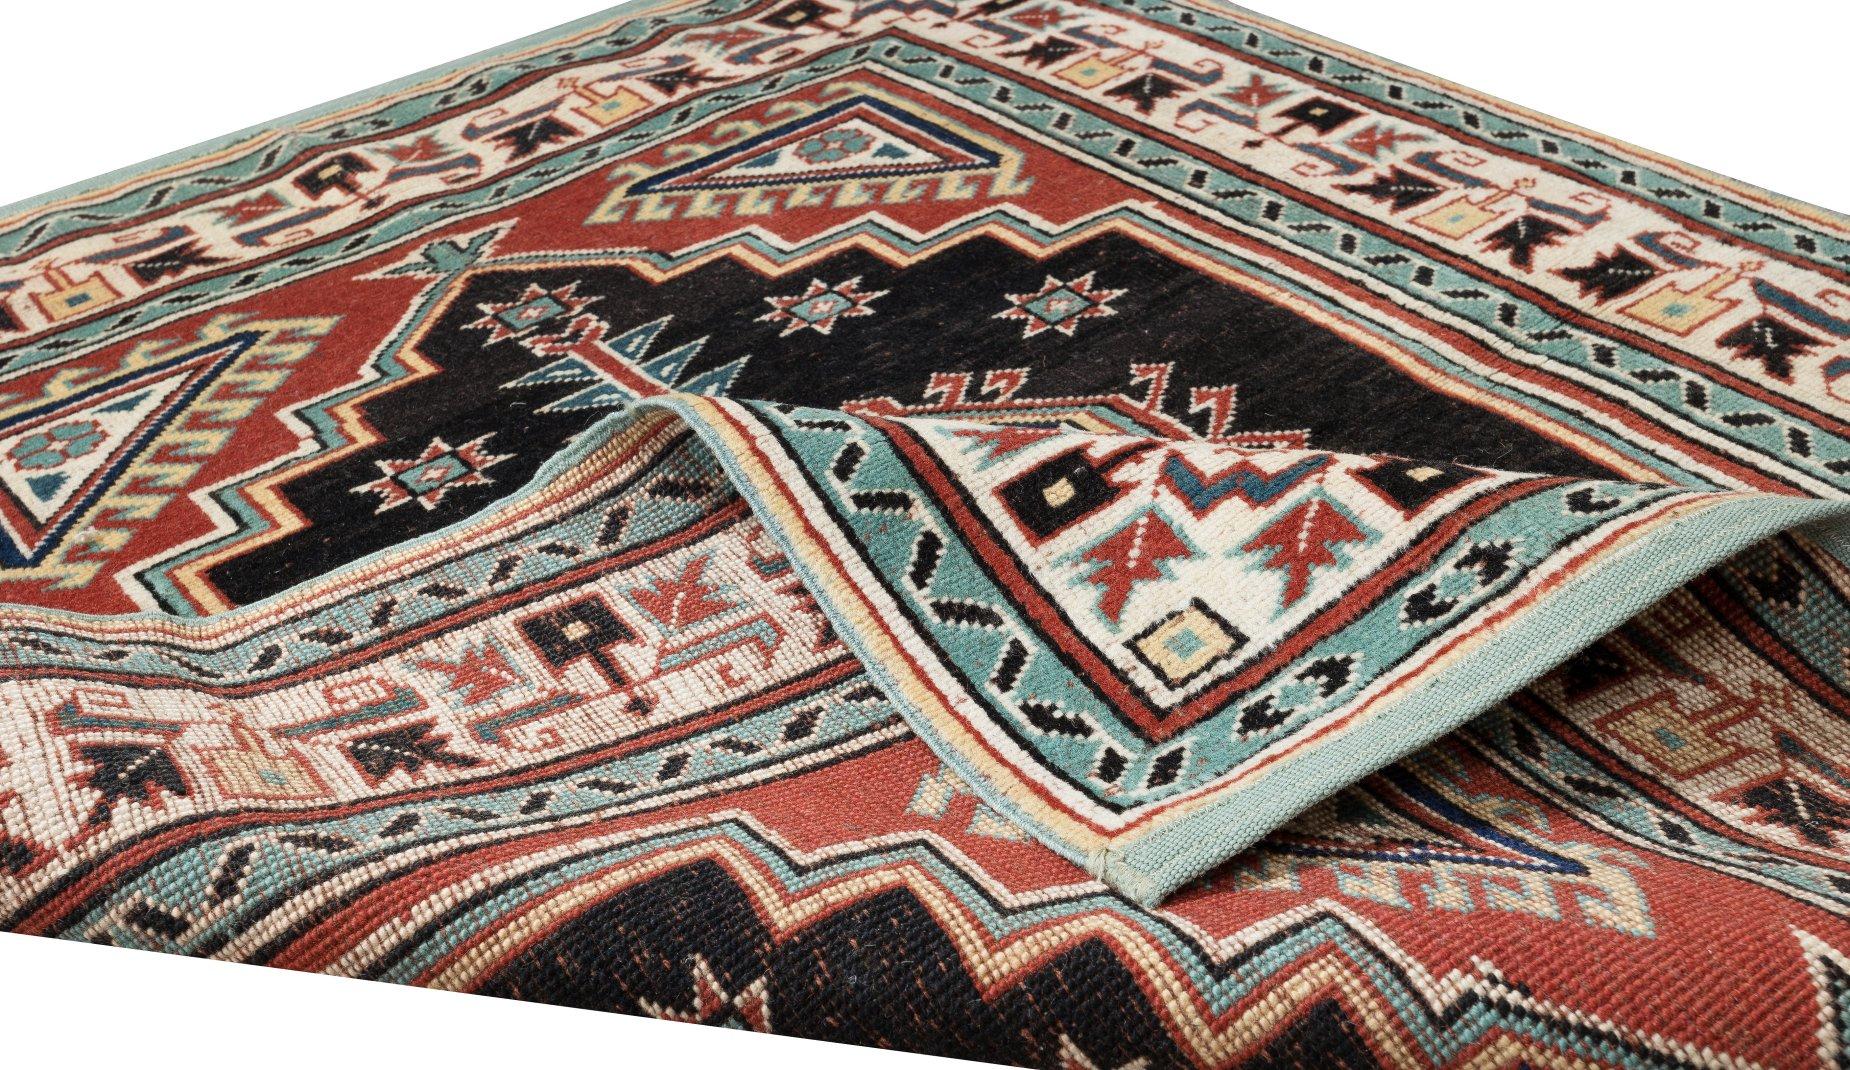 Bohemian 3x3.5 Ft One-of-a-Kind Geometric Hand Knotted Vintage Accent Rug from Turkey For Sale